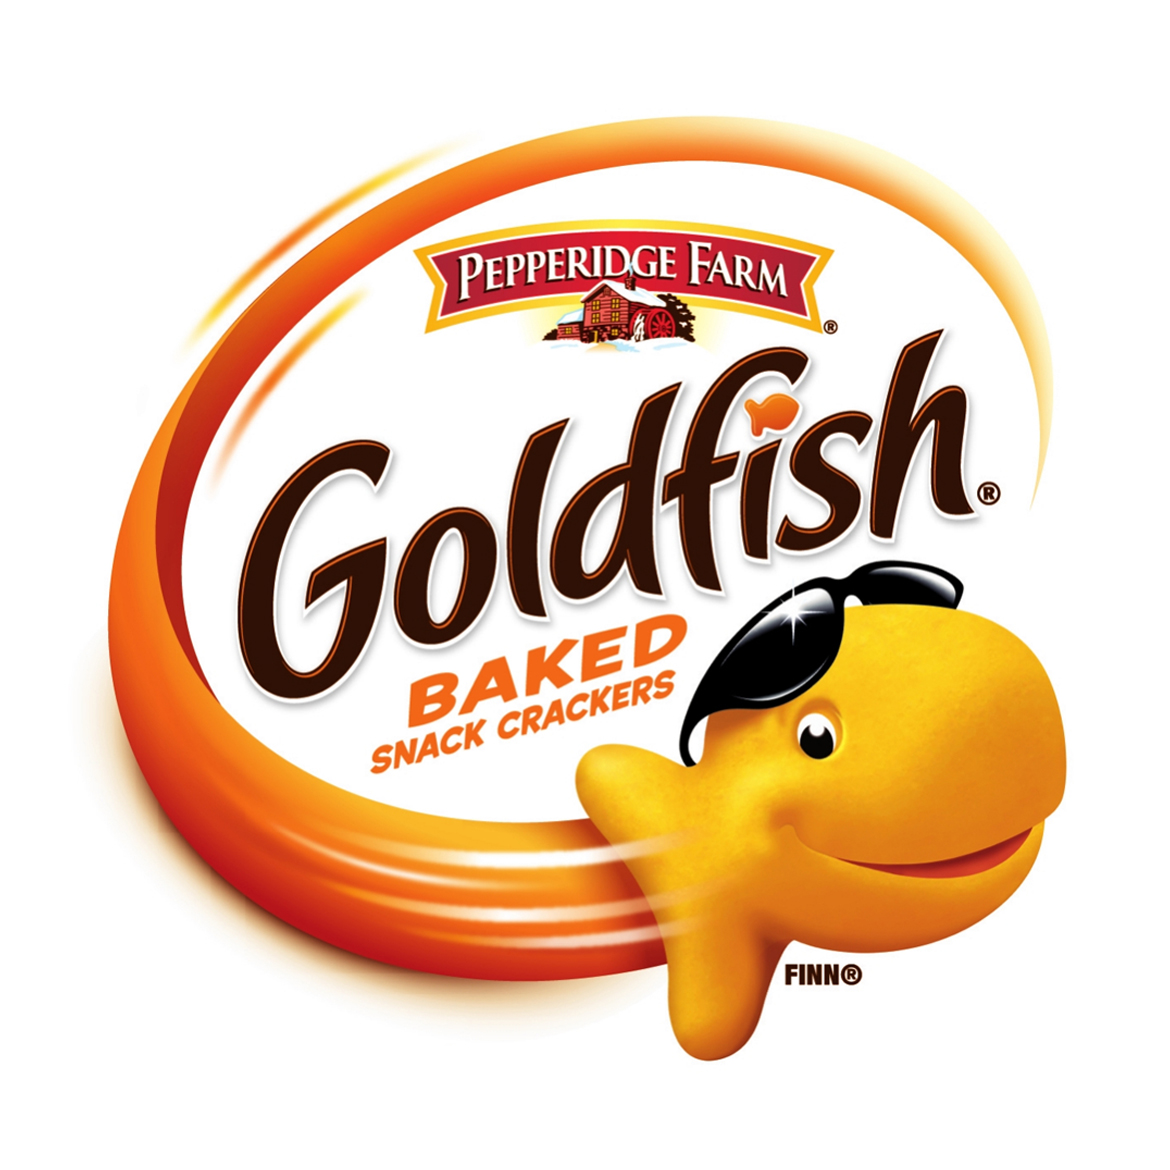 http://www.hoivend.com/img/projects/products/snacks/goldfish.jpg